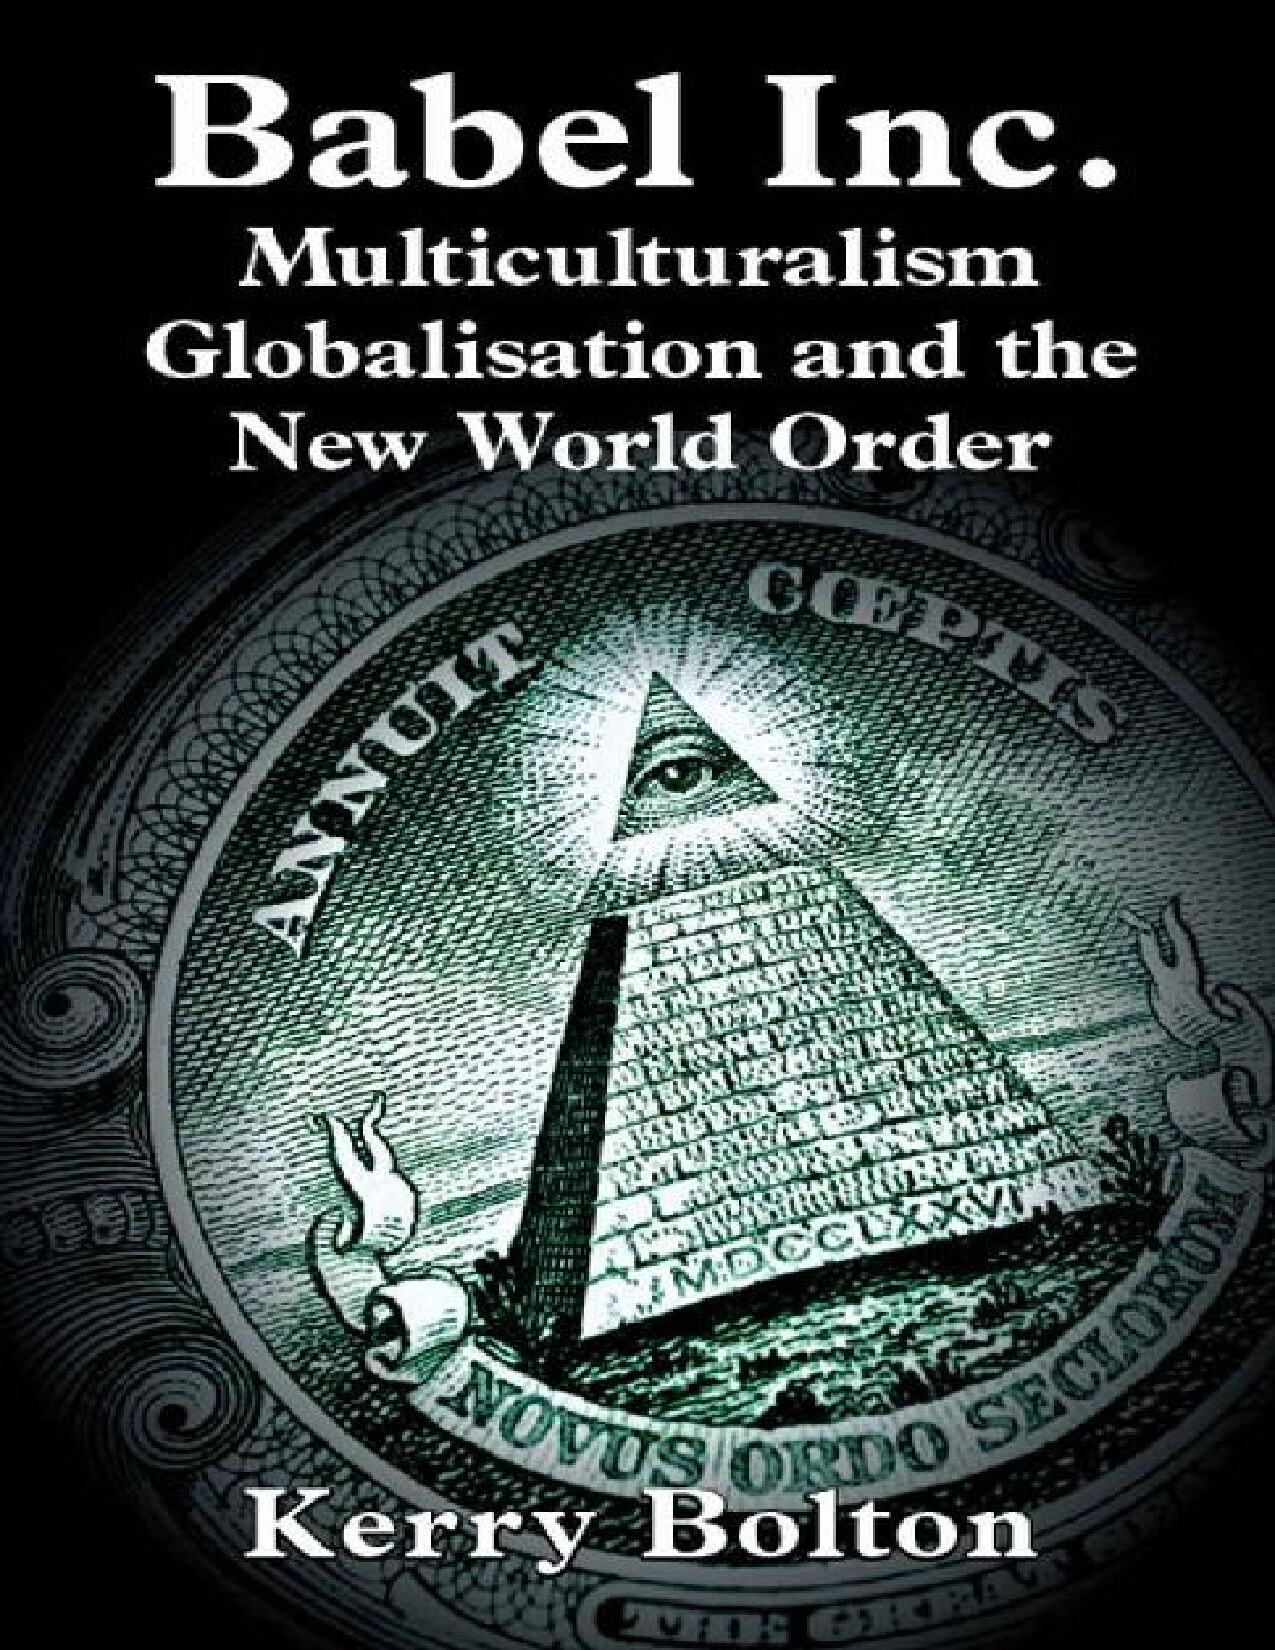 Babel Inc.: Multicultralism, Globalisation & the New World Order